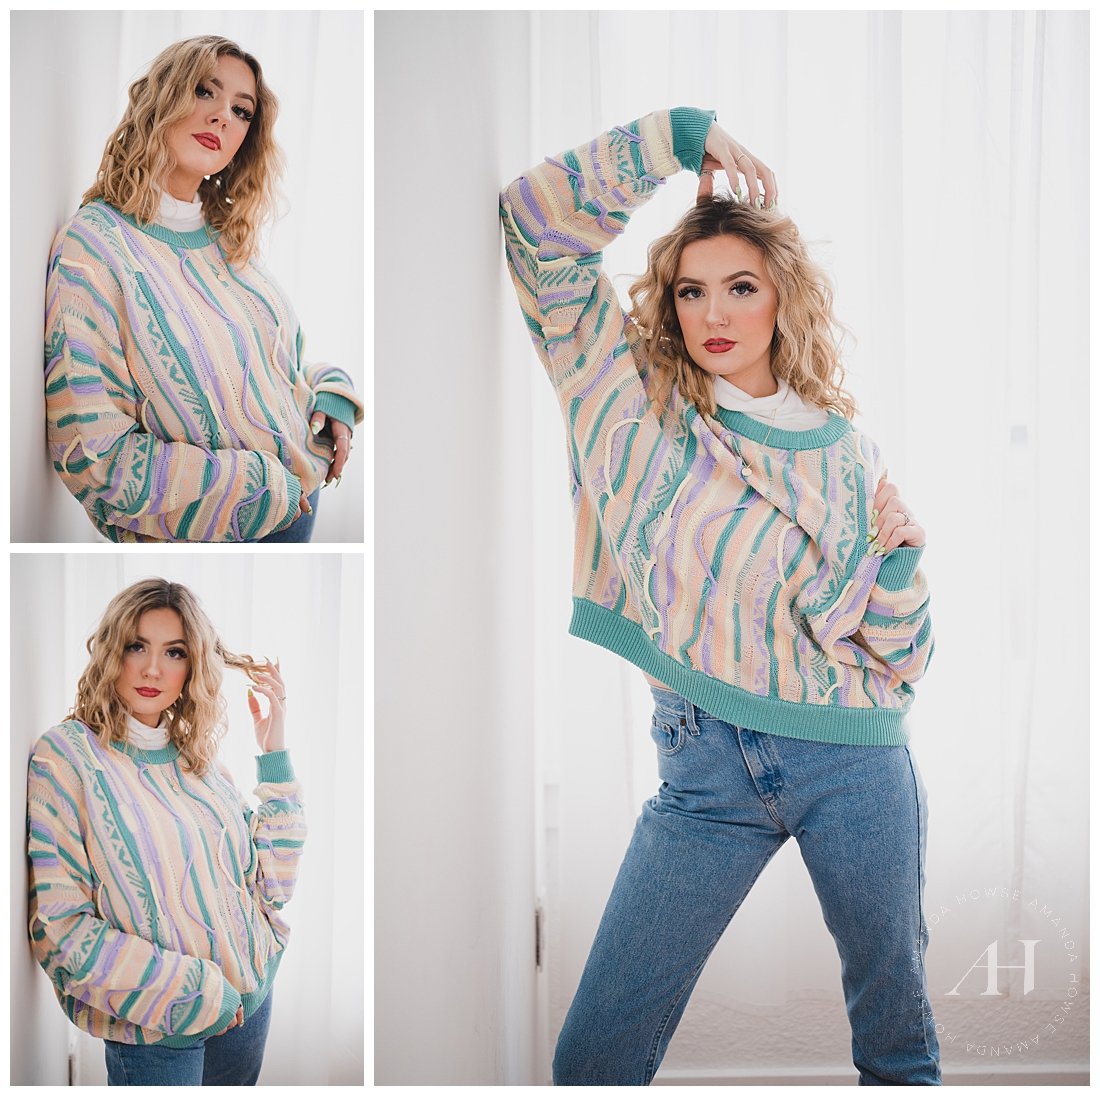 1980s Inspired Photoshoot With Young Woman | How to Style an Oversized Sweater and Mom Jeans | Photographed by Tacoma's Best Photographer Amanda Howse